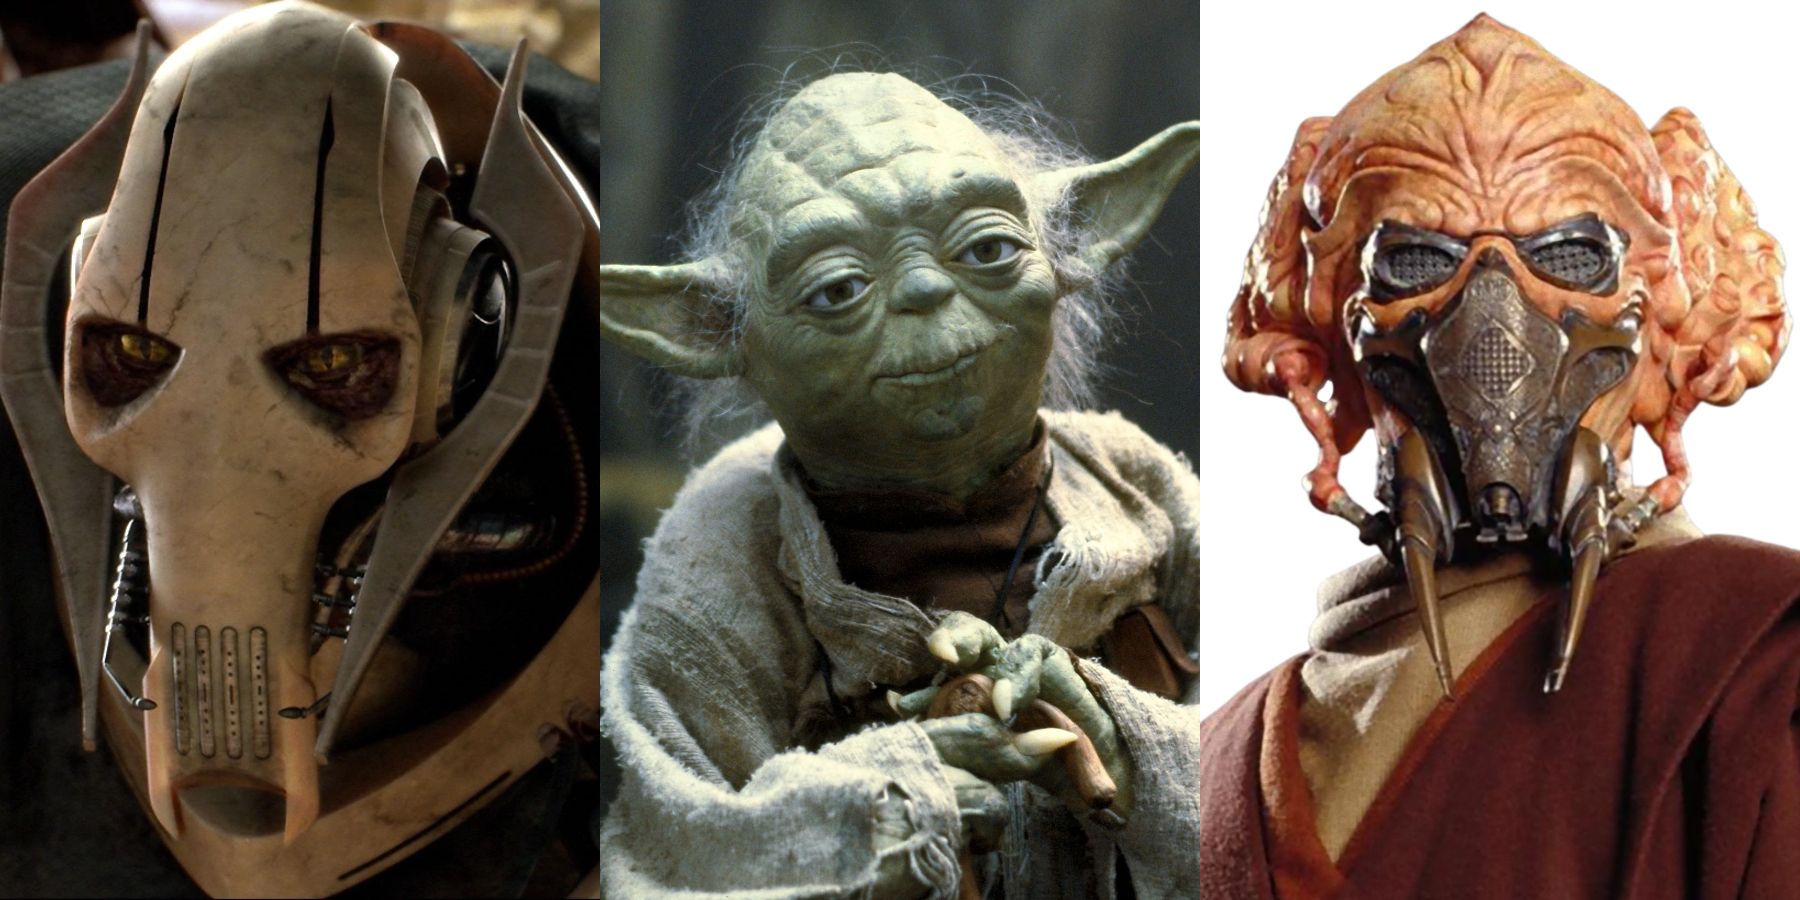 left to right: General Grievous, Yoda, Plo Koon